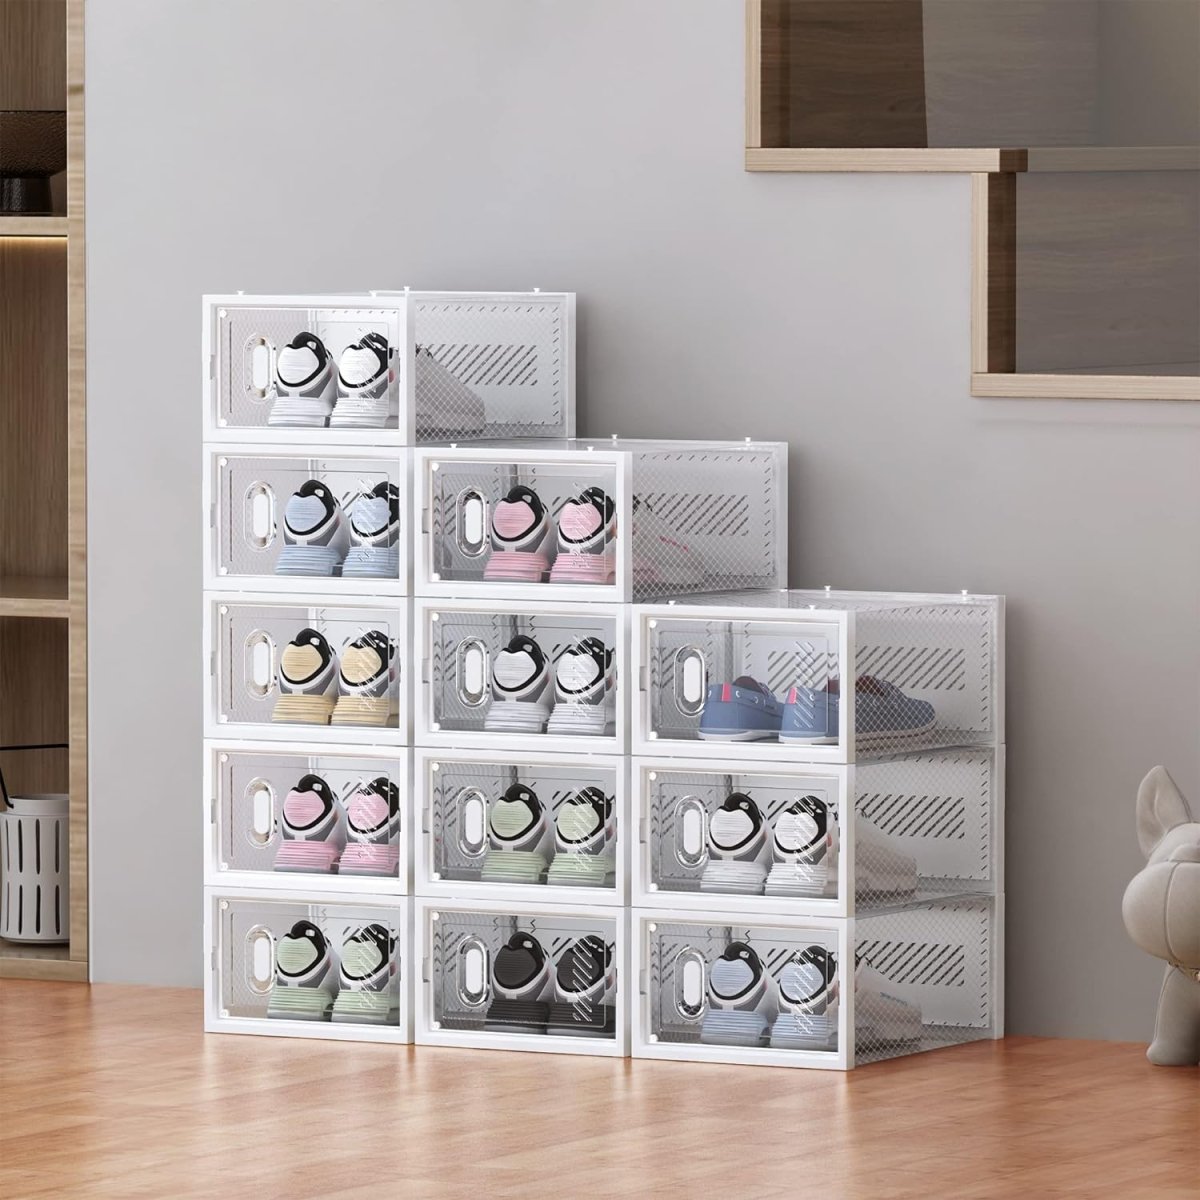 Shoe Crates for Sneakers| Shoe Organizer Containers with Lids- Transparent Shoe Organizers- #Royalkart#crates